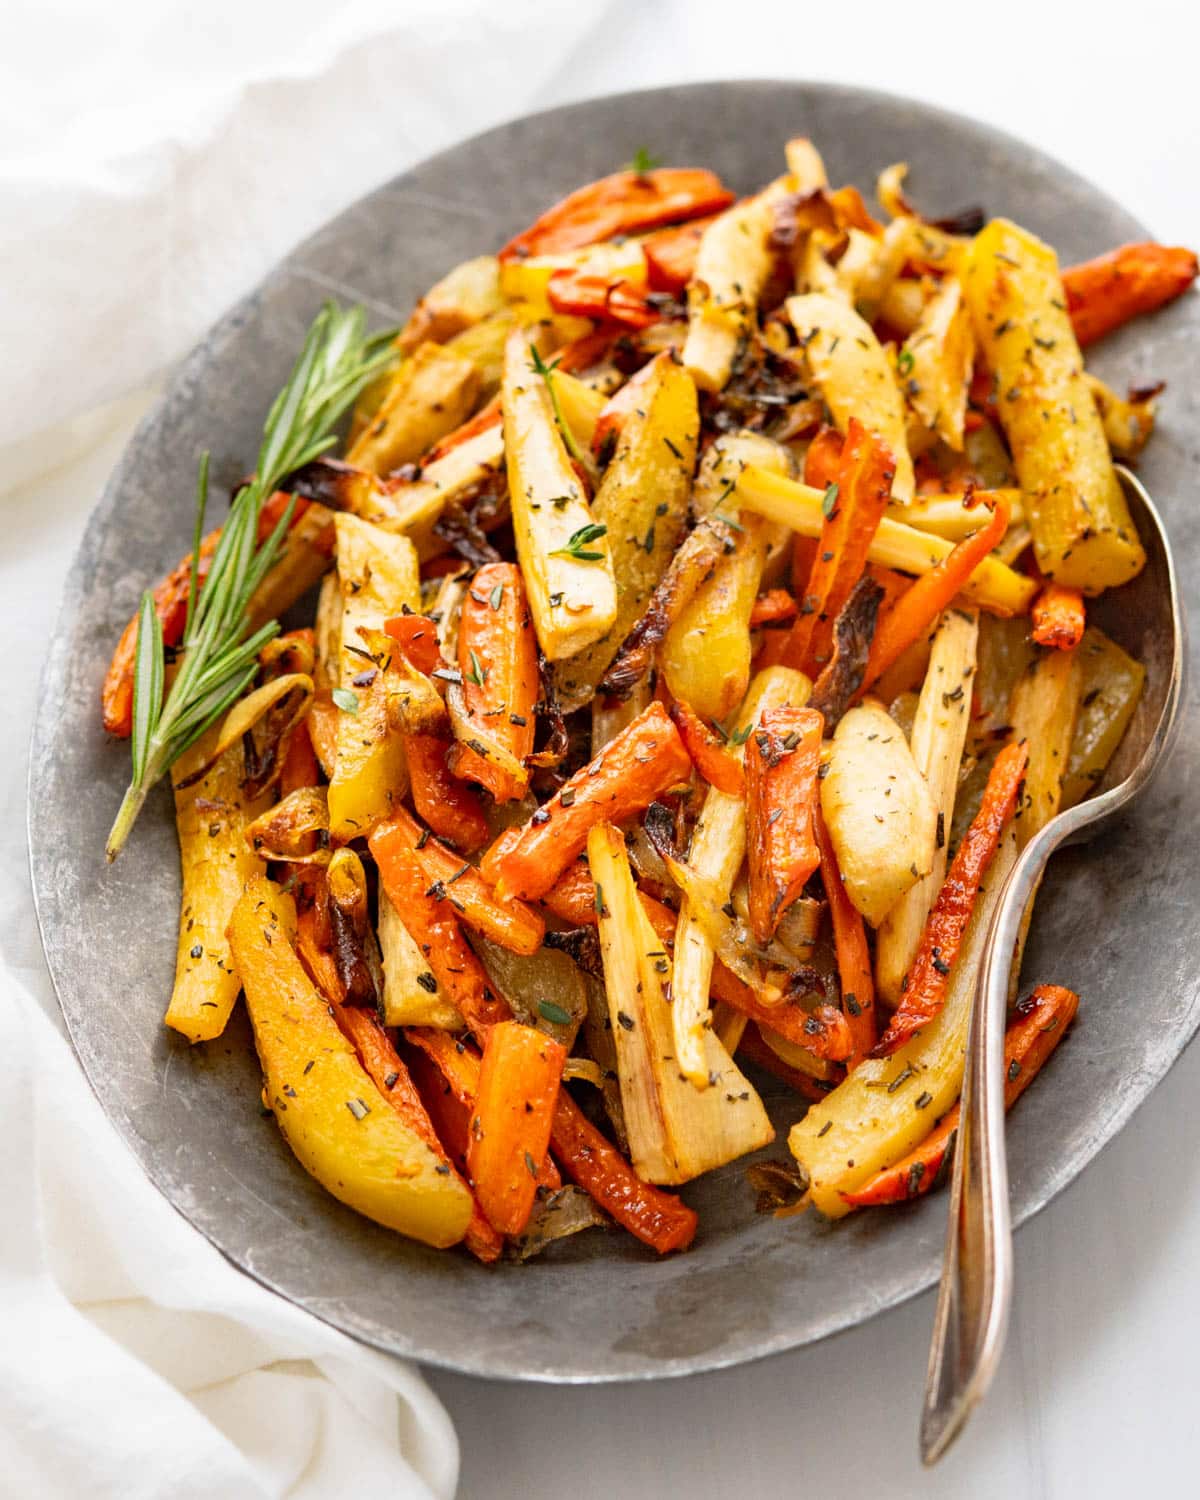 Serving a platter of roasted carrots and parsnips.